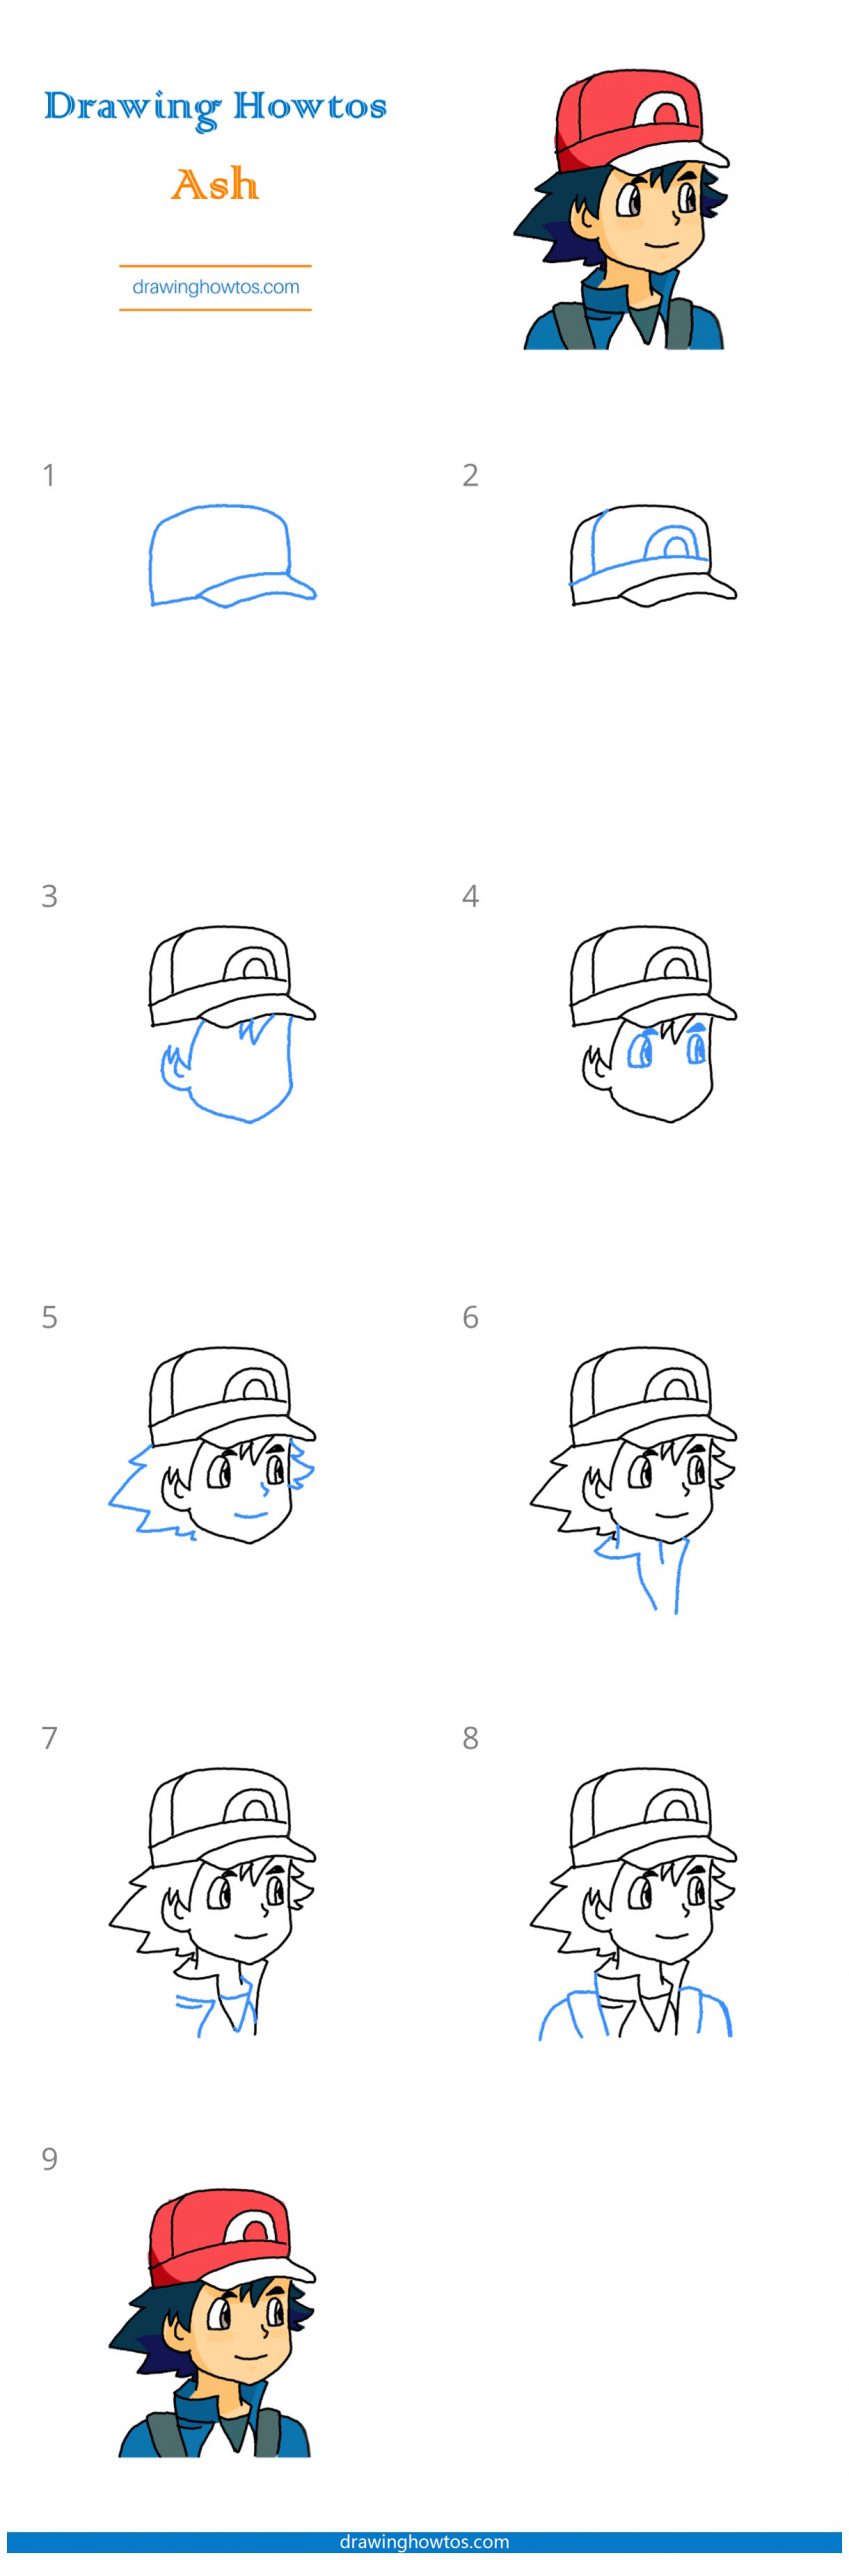 How to Draw Ash Ketchum Step by Step